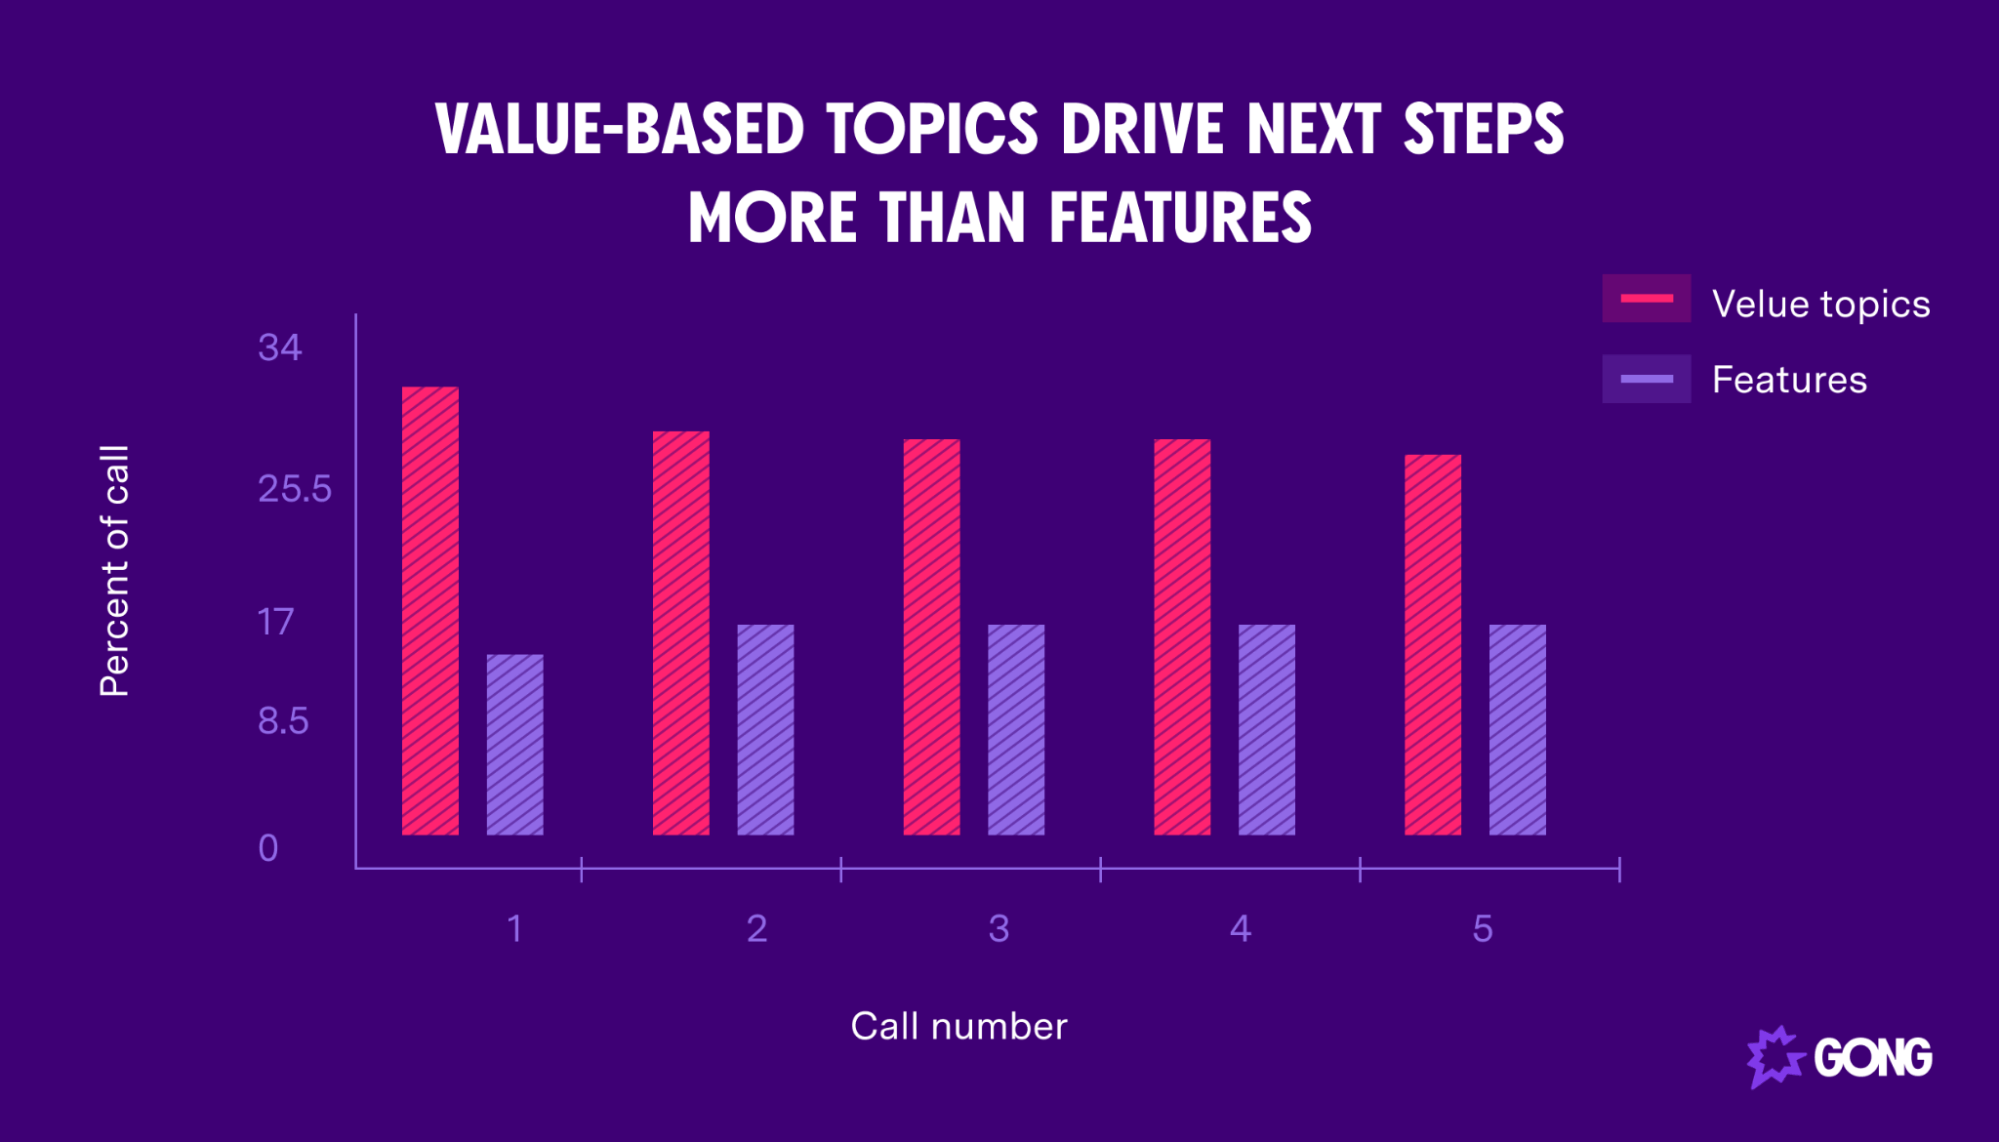 Value-based topics drive next steps more than features